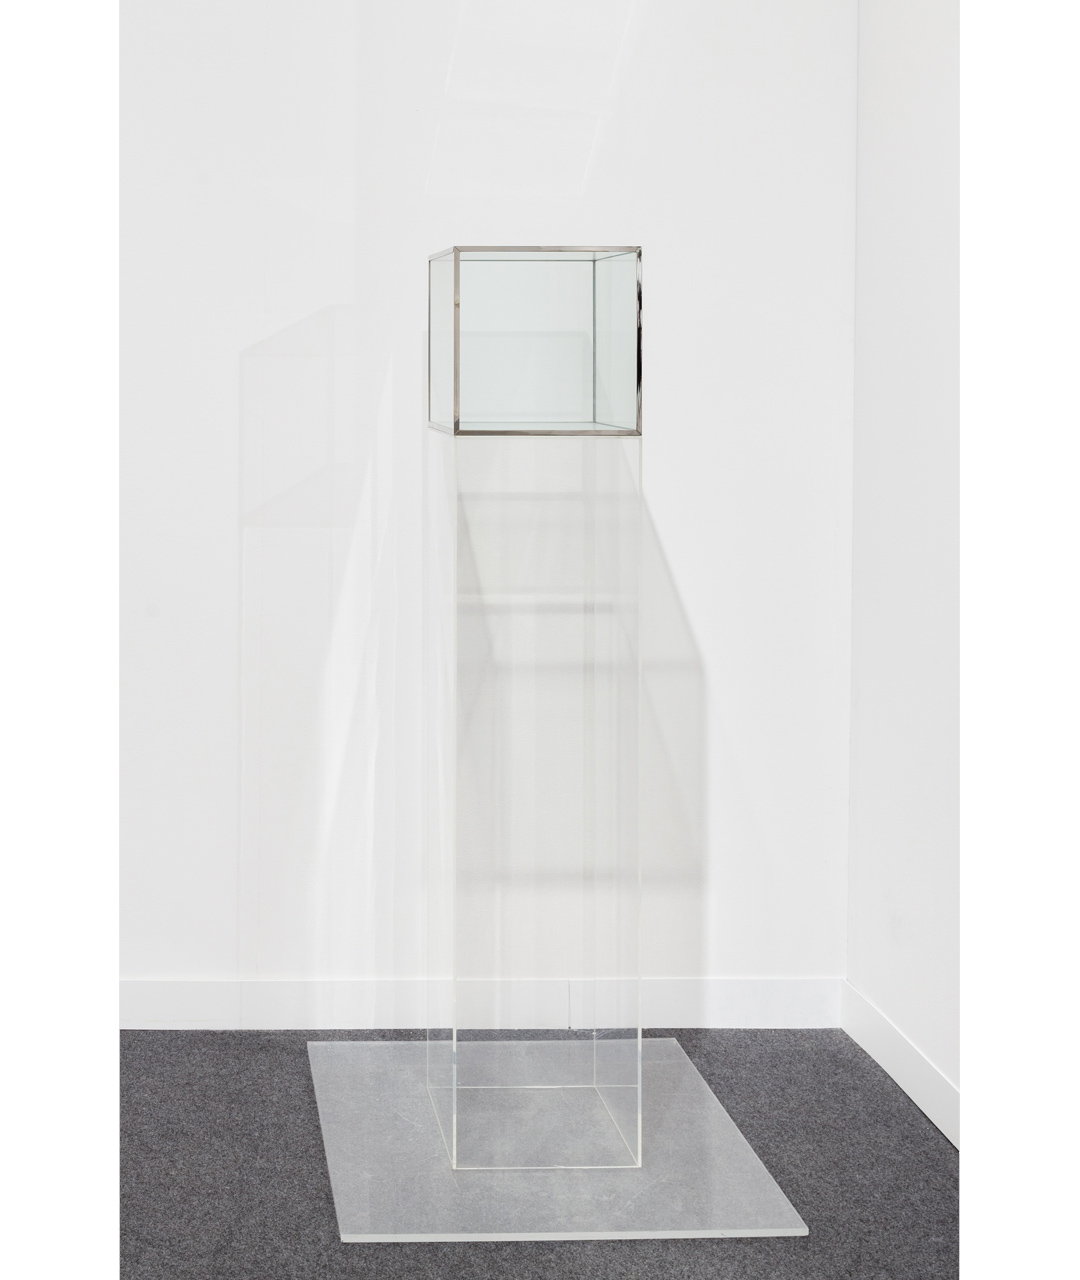  Larry Bell   Untitled , c. 1968 Glass cube with metal seams cube: 12 x 12 x 12 inches (30.5 x 30.5 x 30.5 cm) pedestal: 48 x 12 x 12 inches (122 x 30.5 x 30.5 cm)     